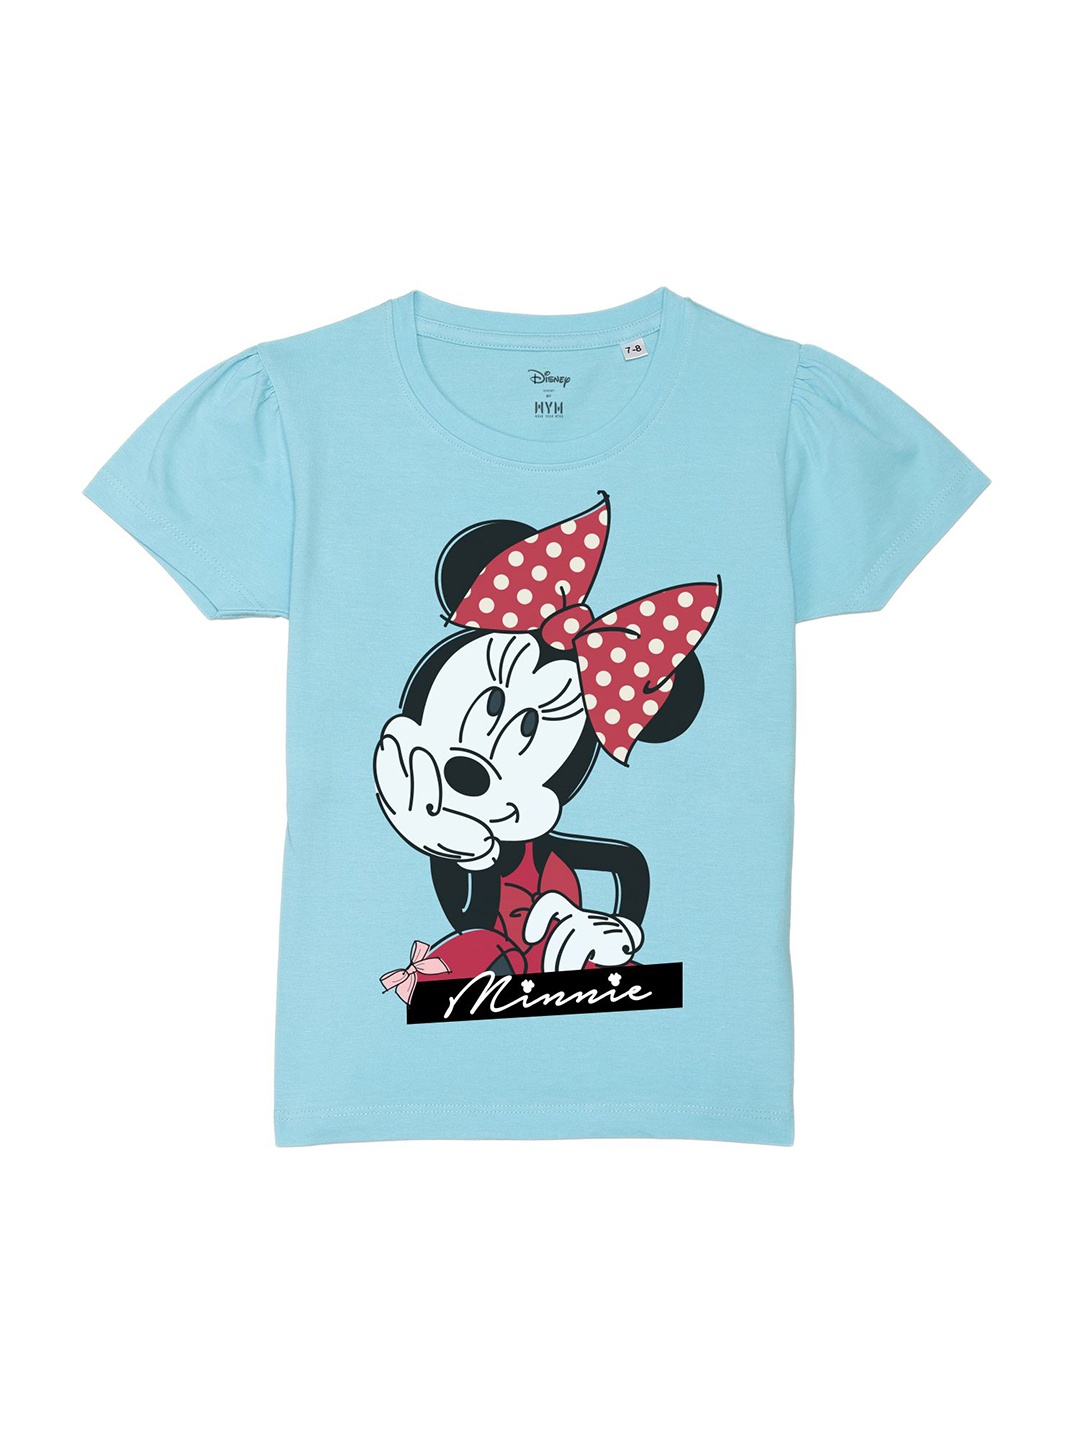 

Disney by Wear Your Mind Girls Minnie Mouse Printed Pure Cotton T-shirt, Blue